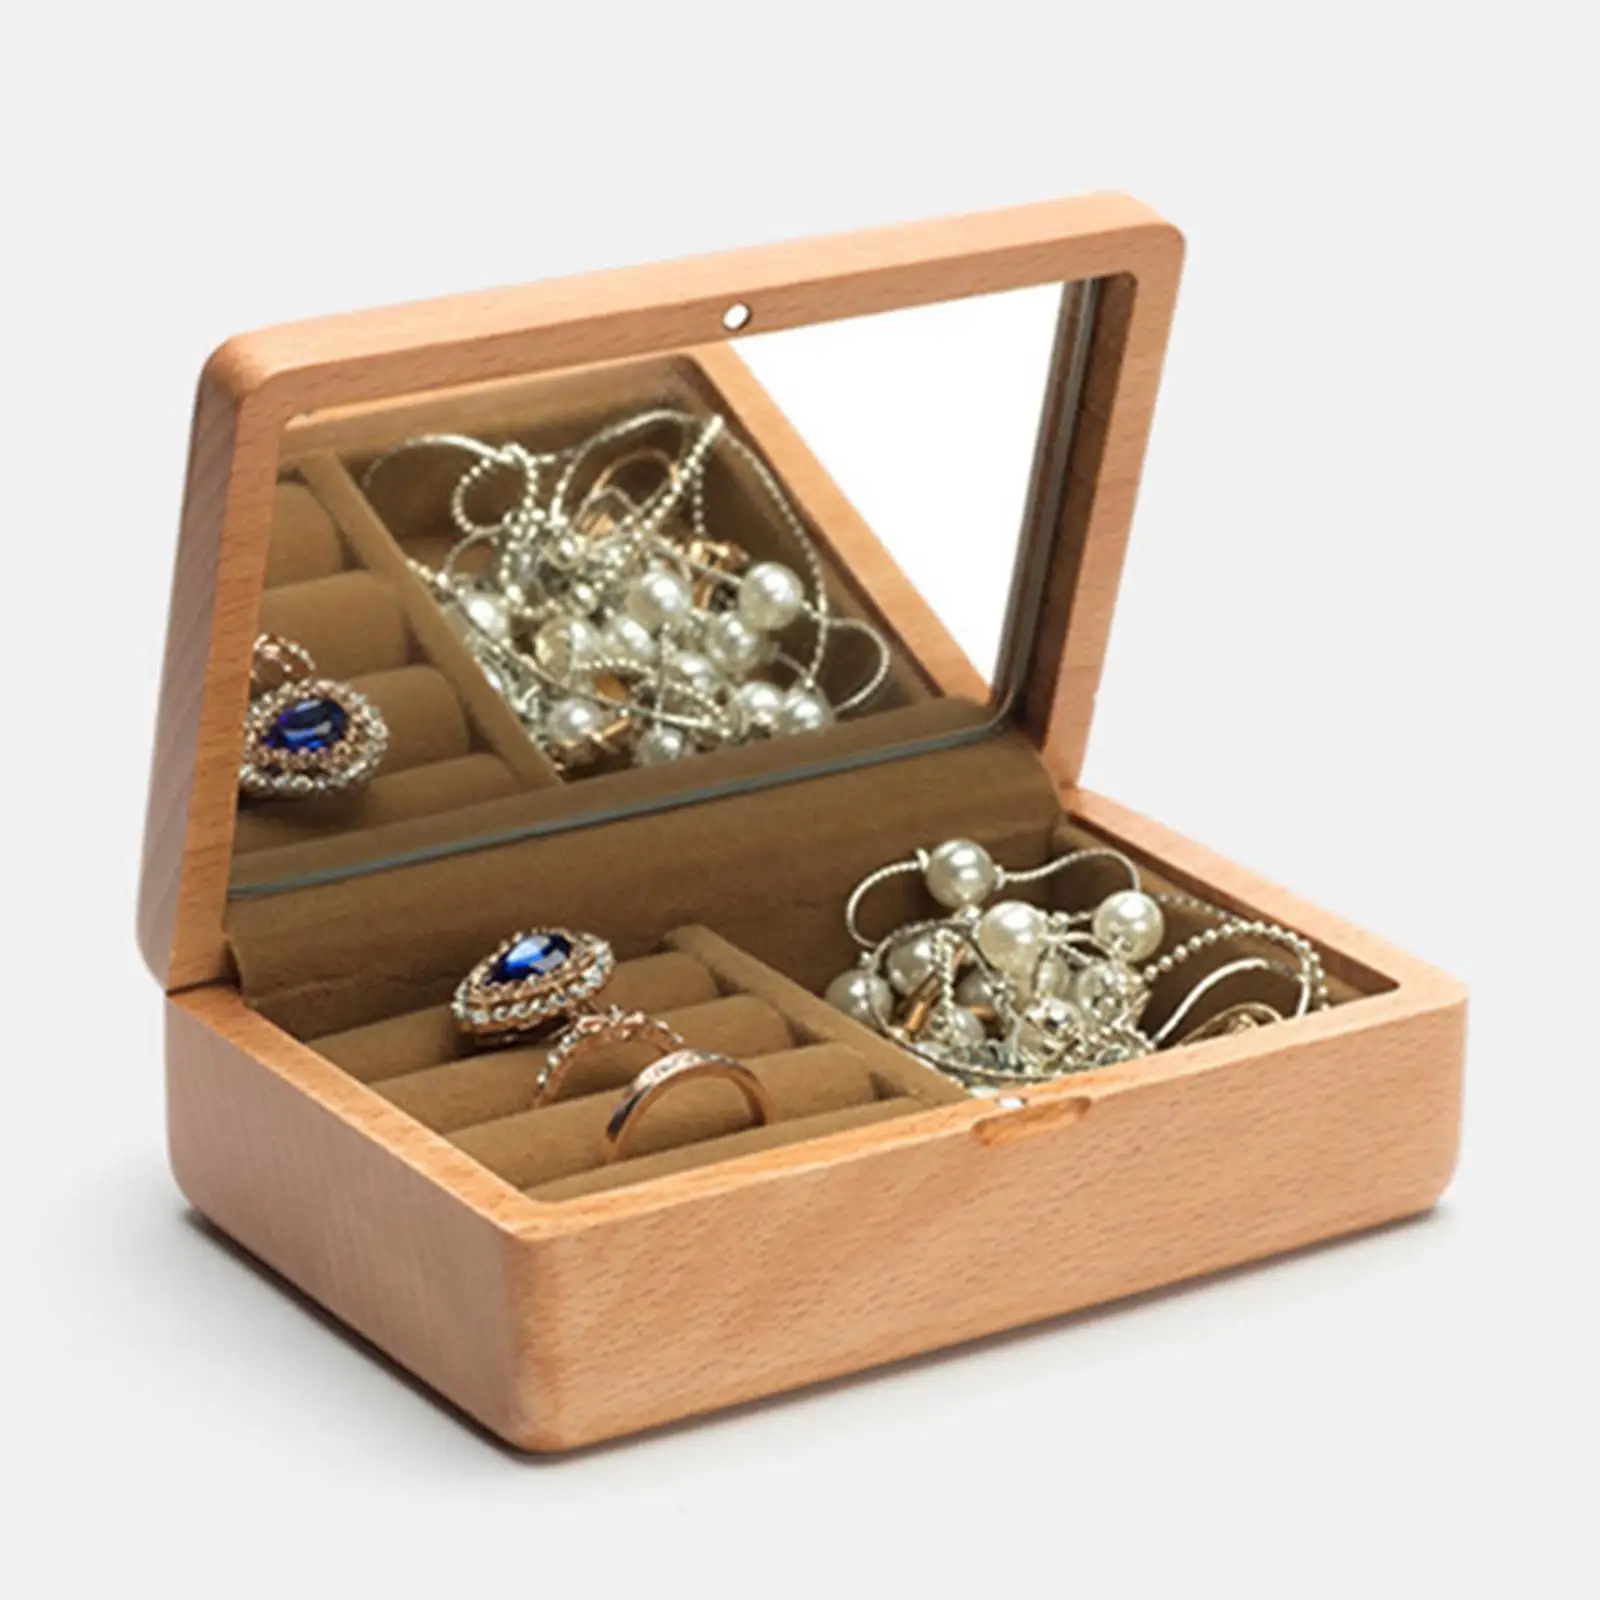 Rustic Wooden Jewelry Box Display Holder for Engagement Ceremony Gift